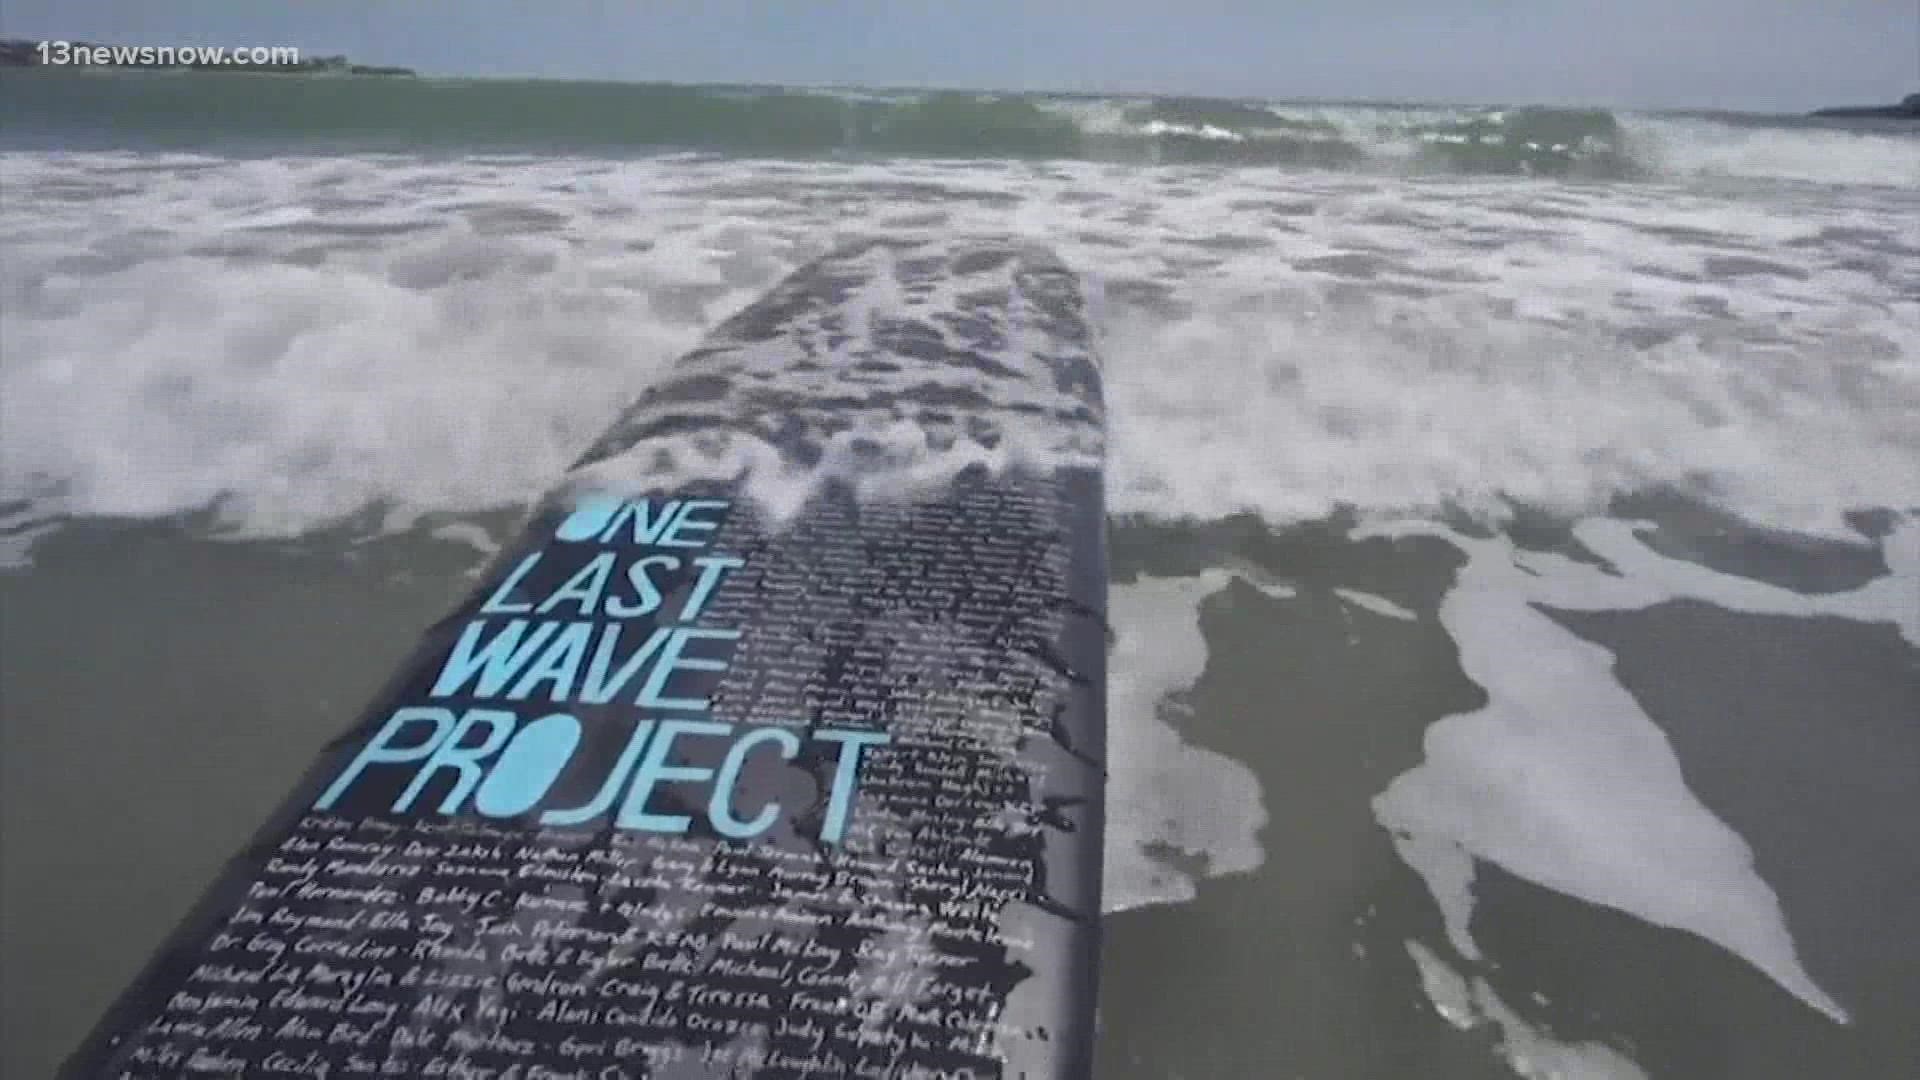 A Rhode Island man started the "One Last Wave" project. He uses his surfboard to honor passed surfers, and people who wanted to surf but never got the chance.